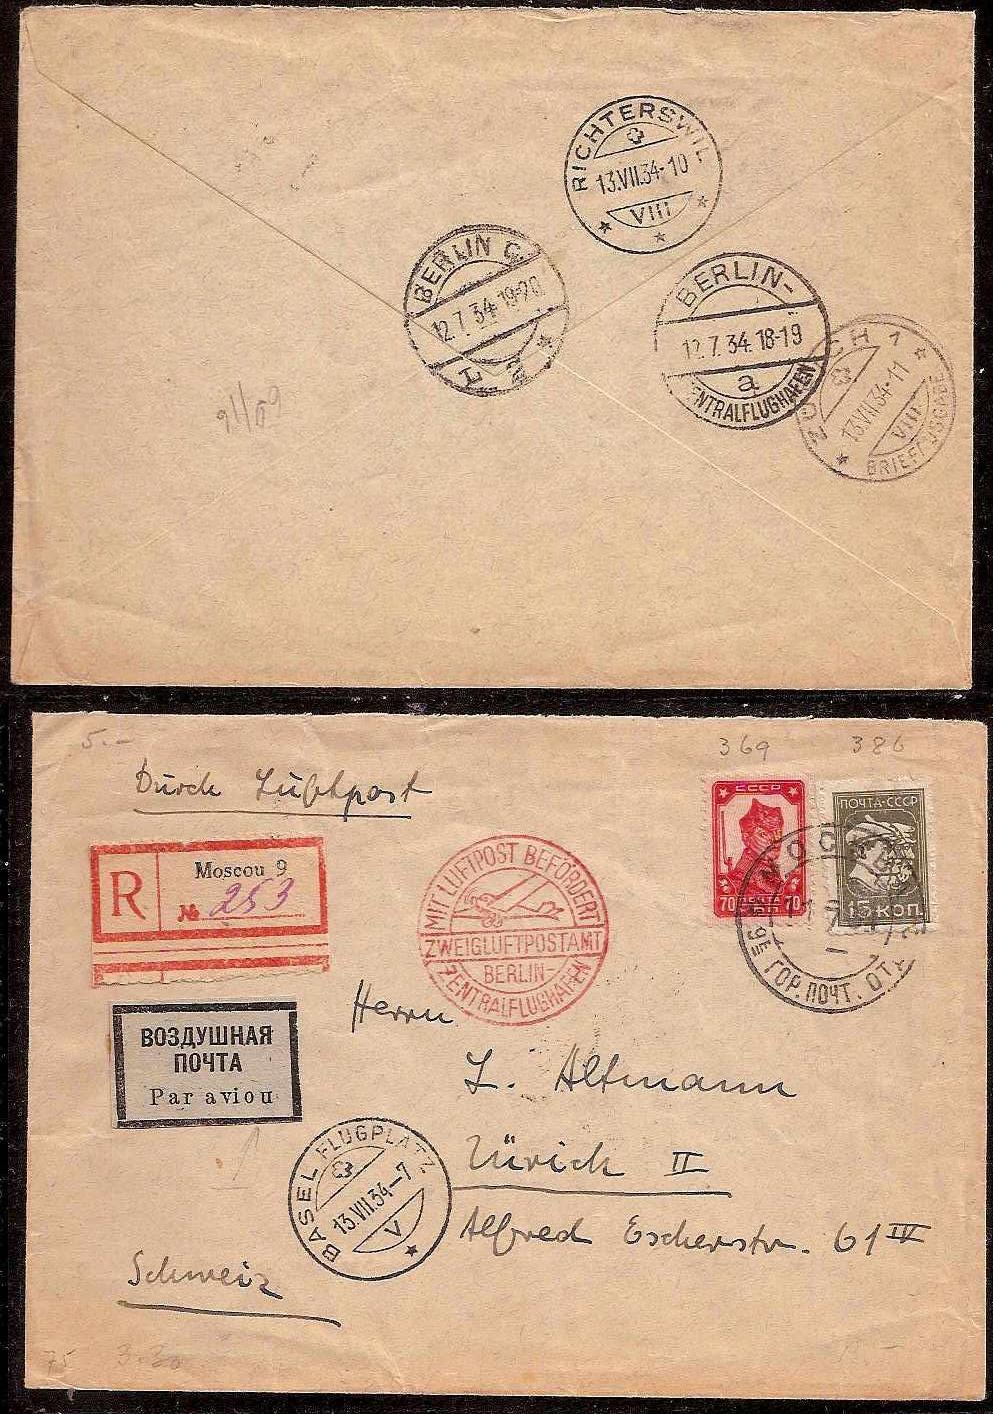 Russia Postal History - Airmails. Airmail covers Scott 1934 